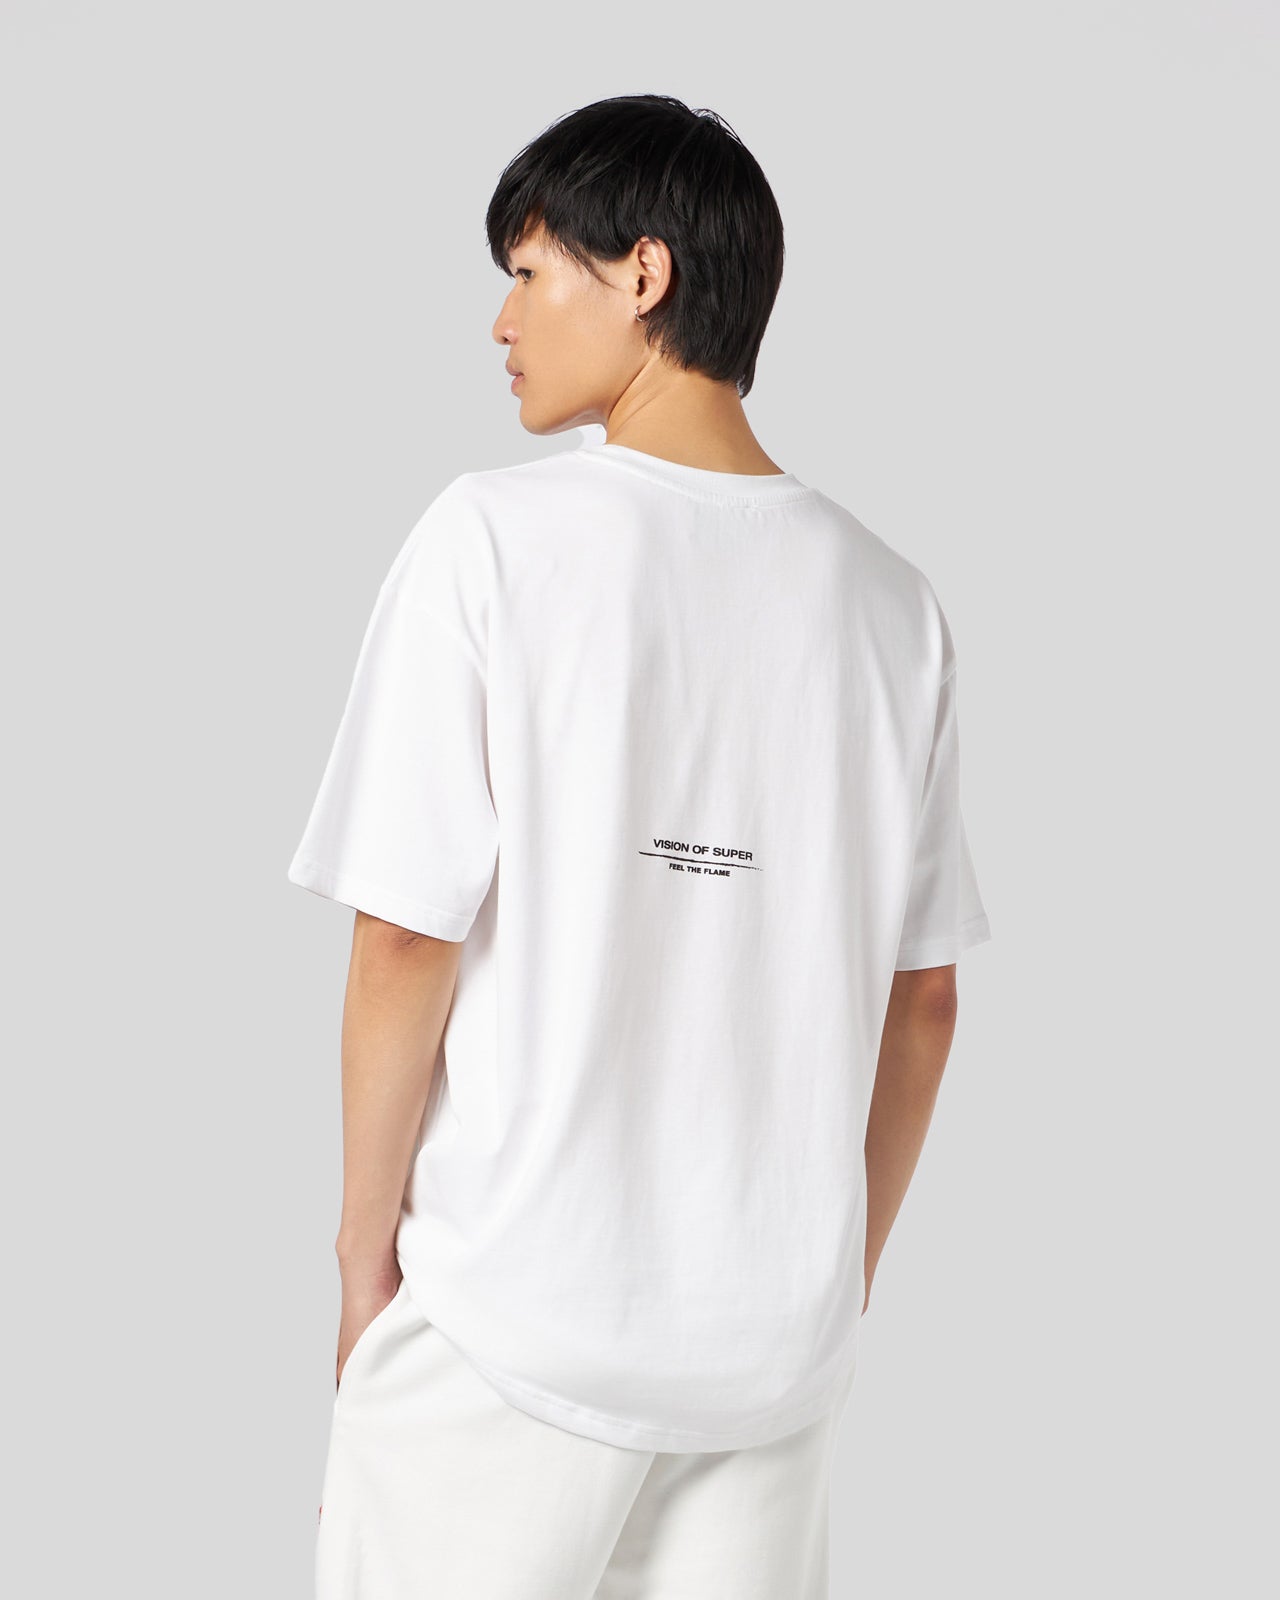 WHITE T-SHIRT WITH FLAMES LOGO